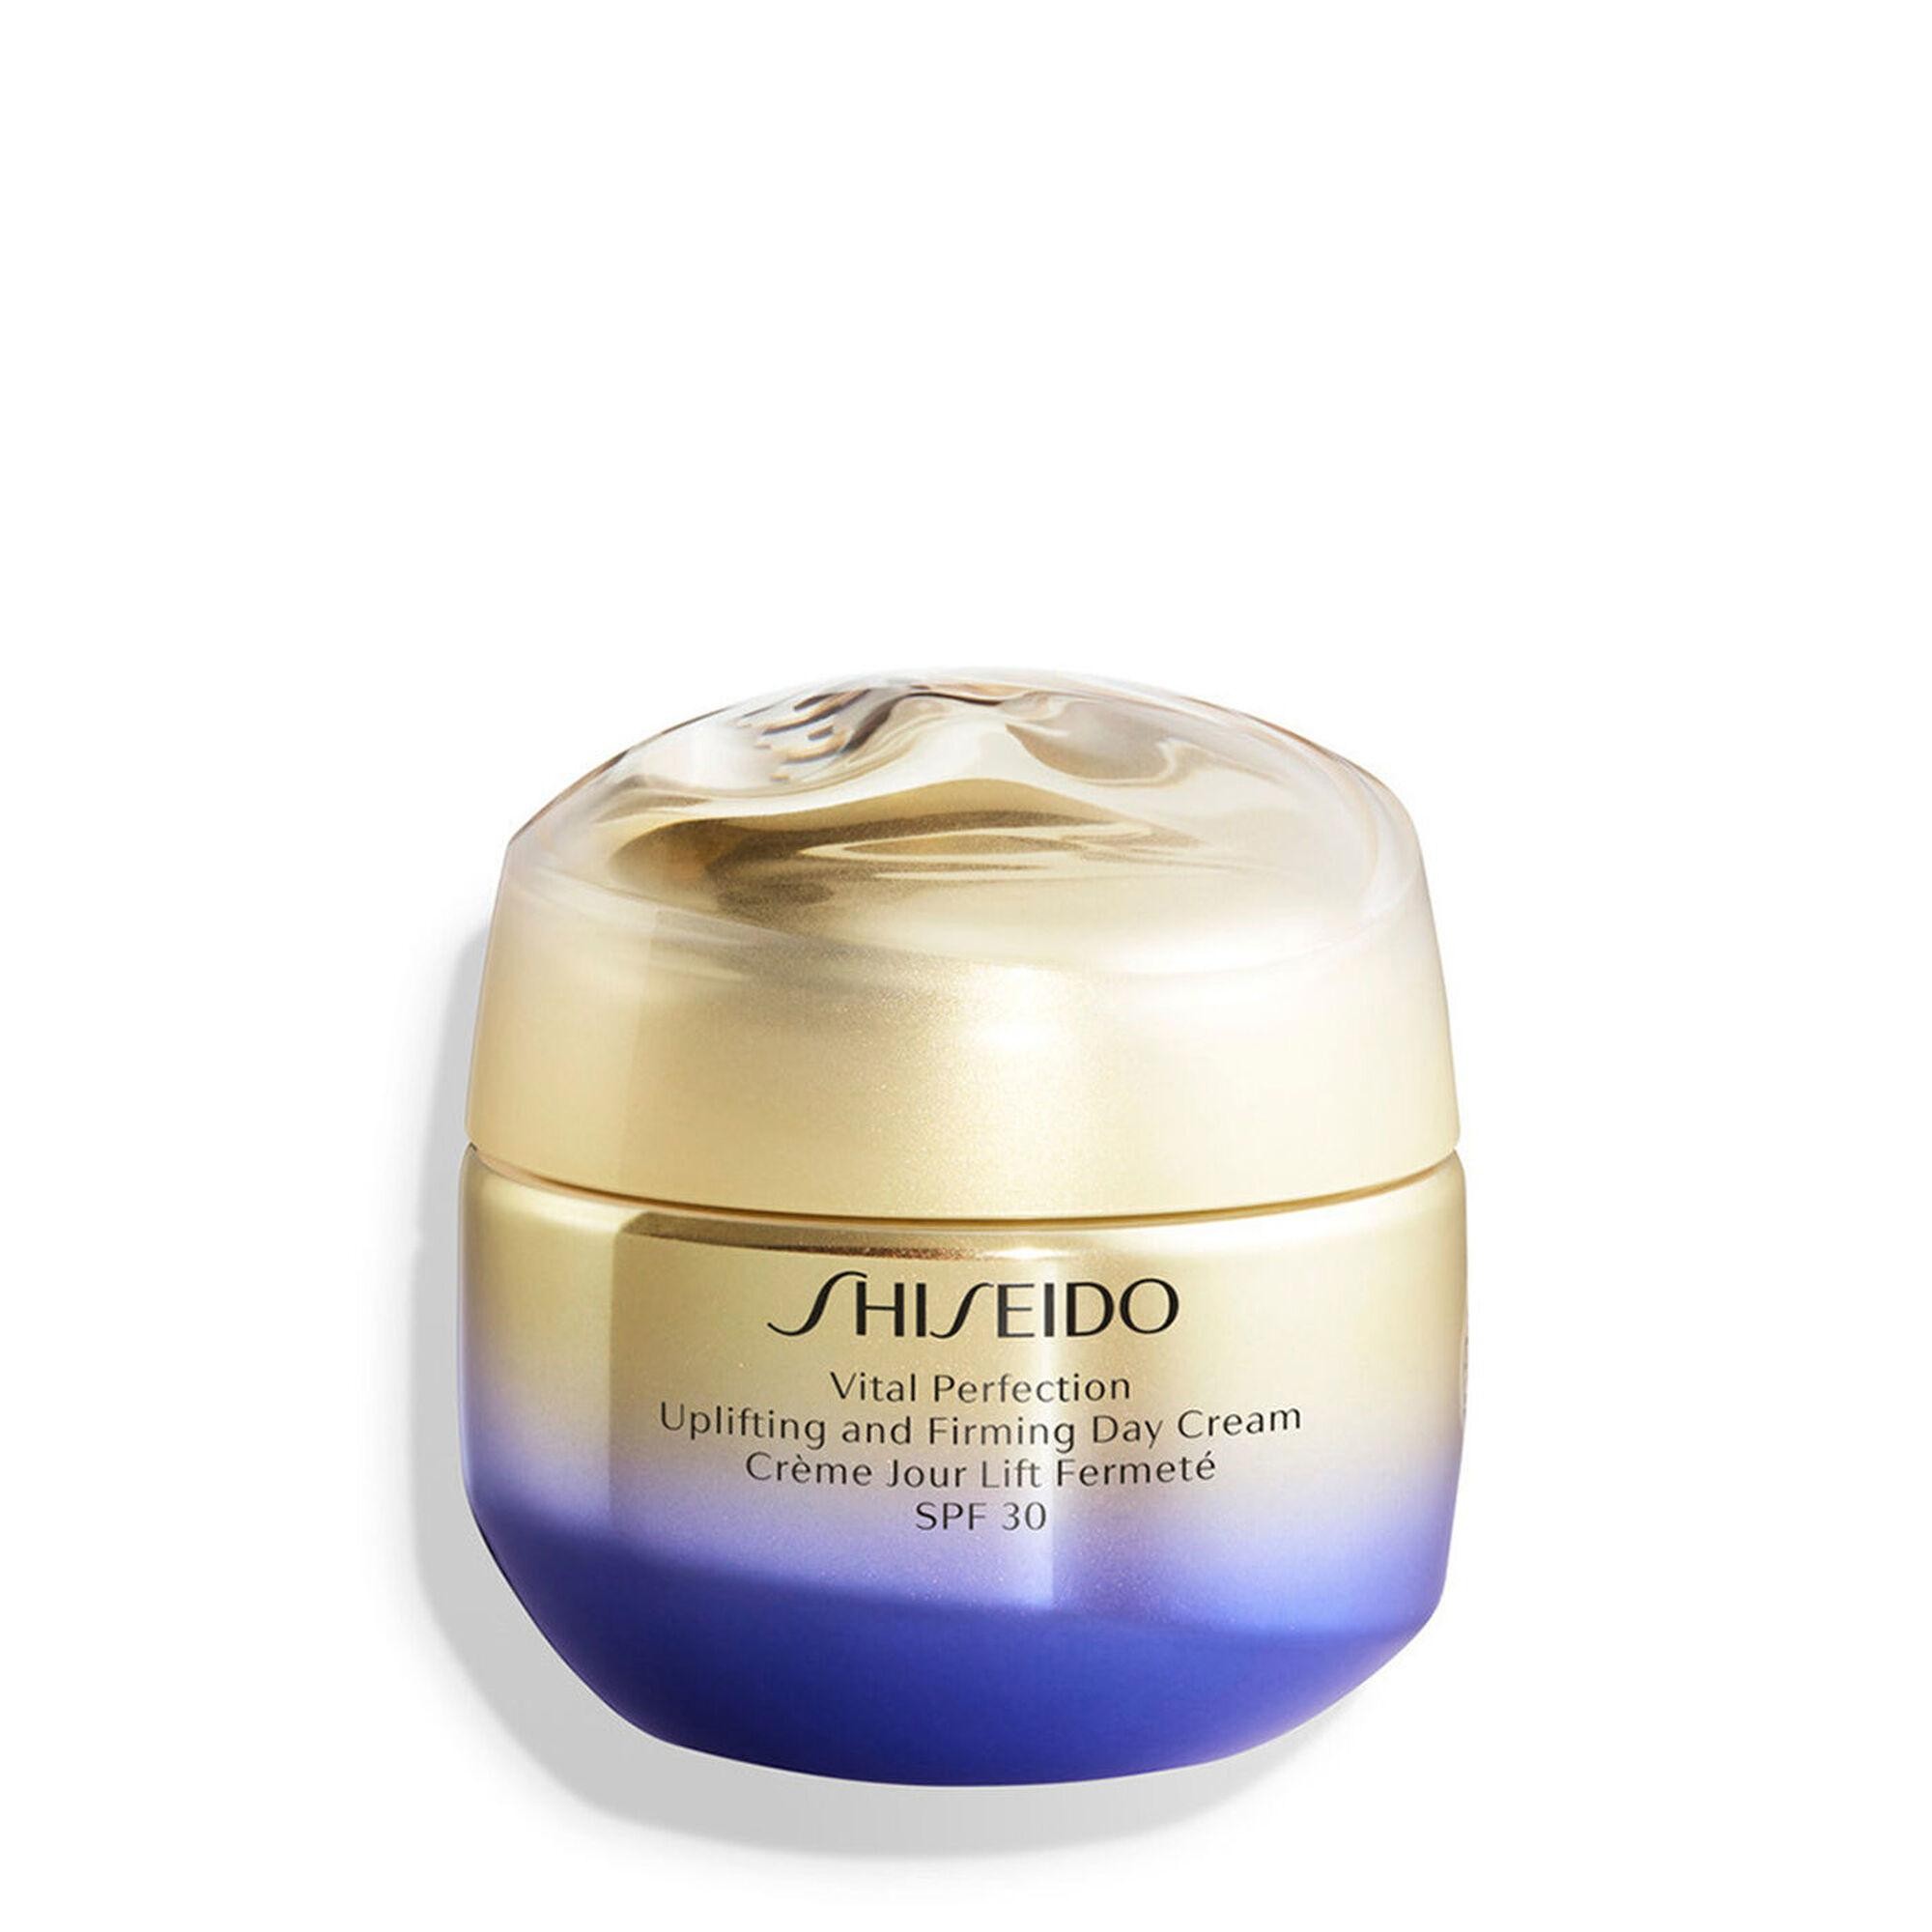 Shiseido Vital Perfection Uplifting and Firming Day Cream